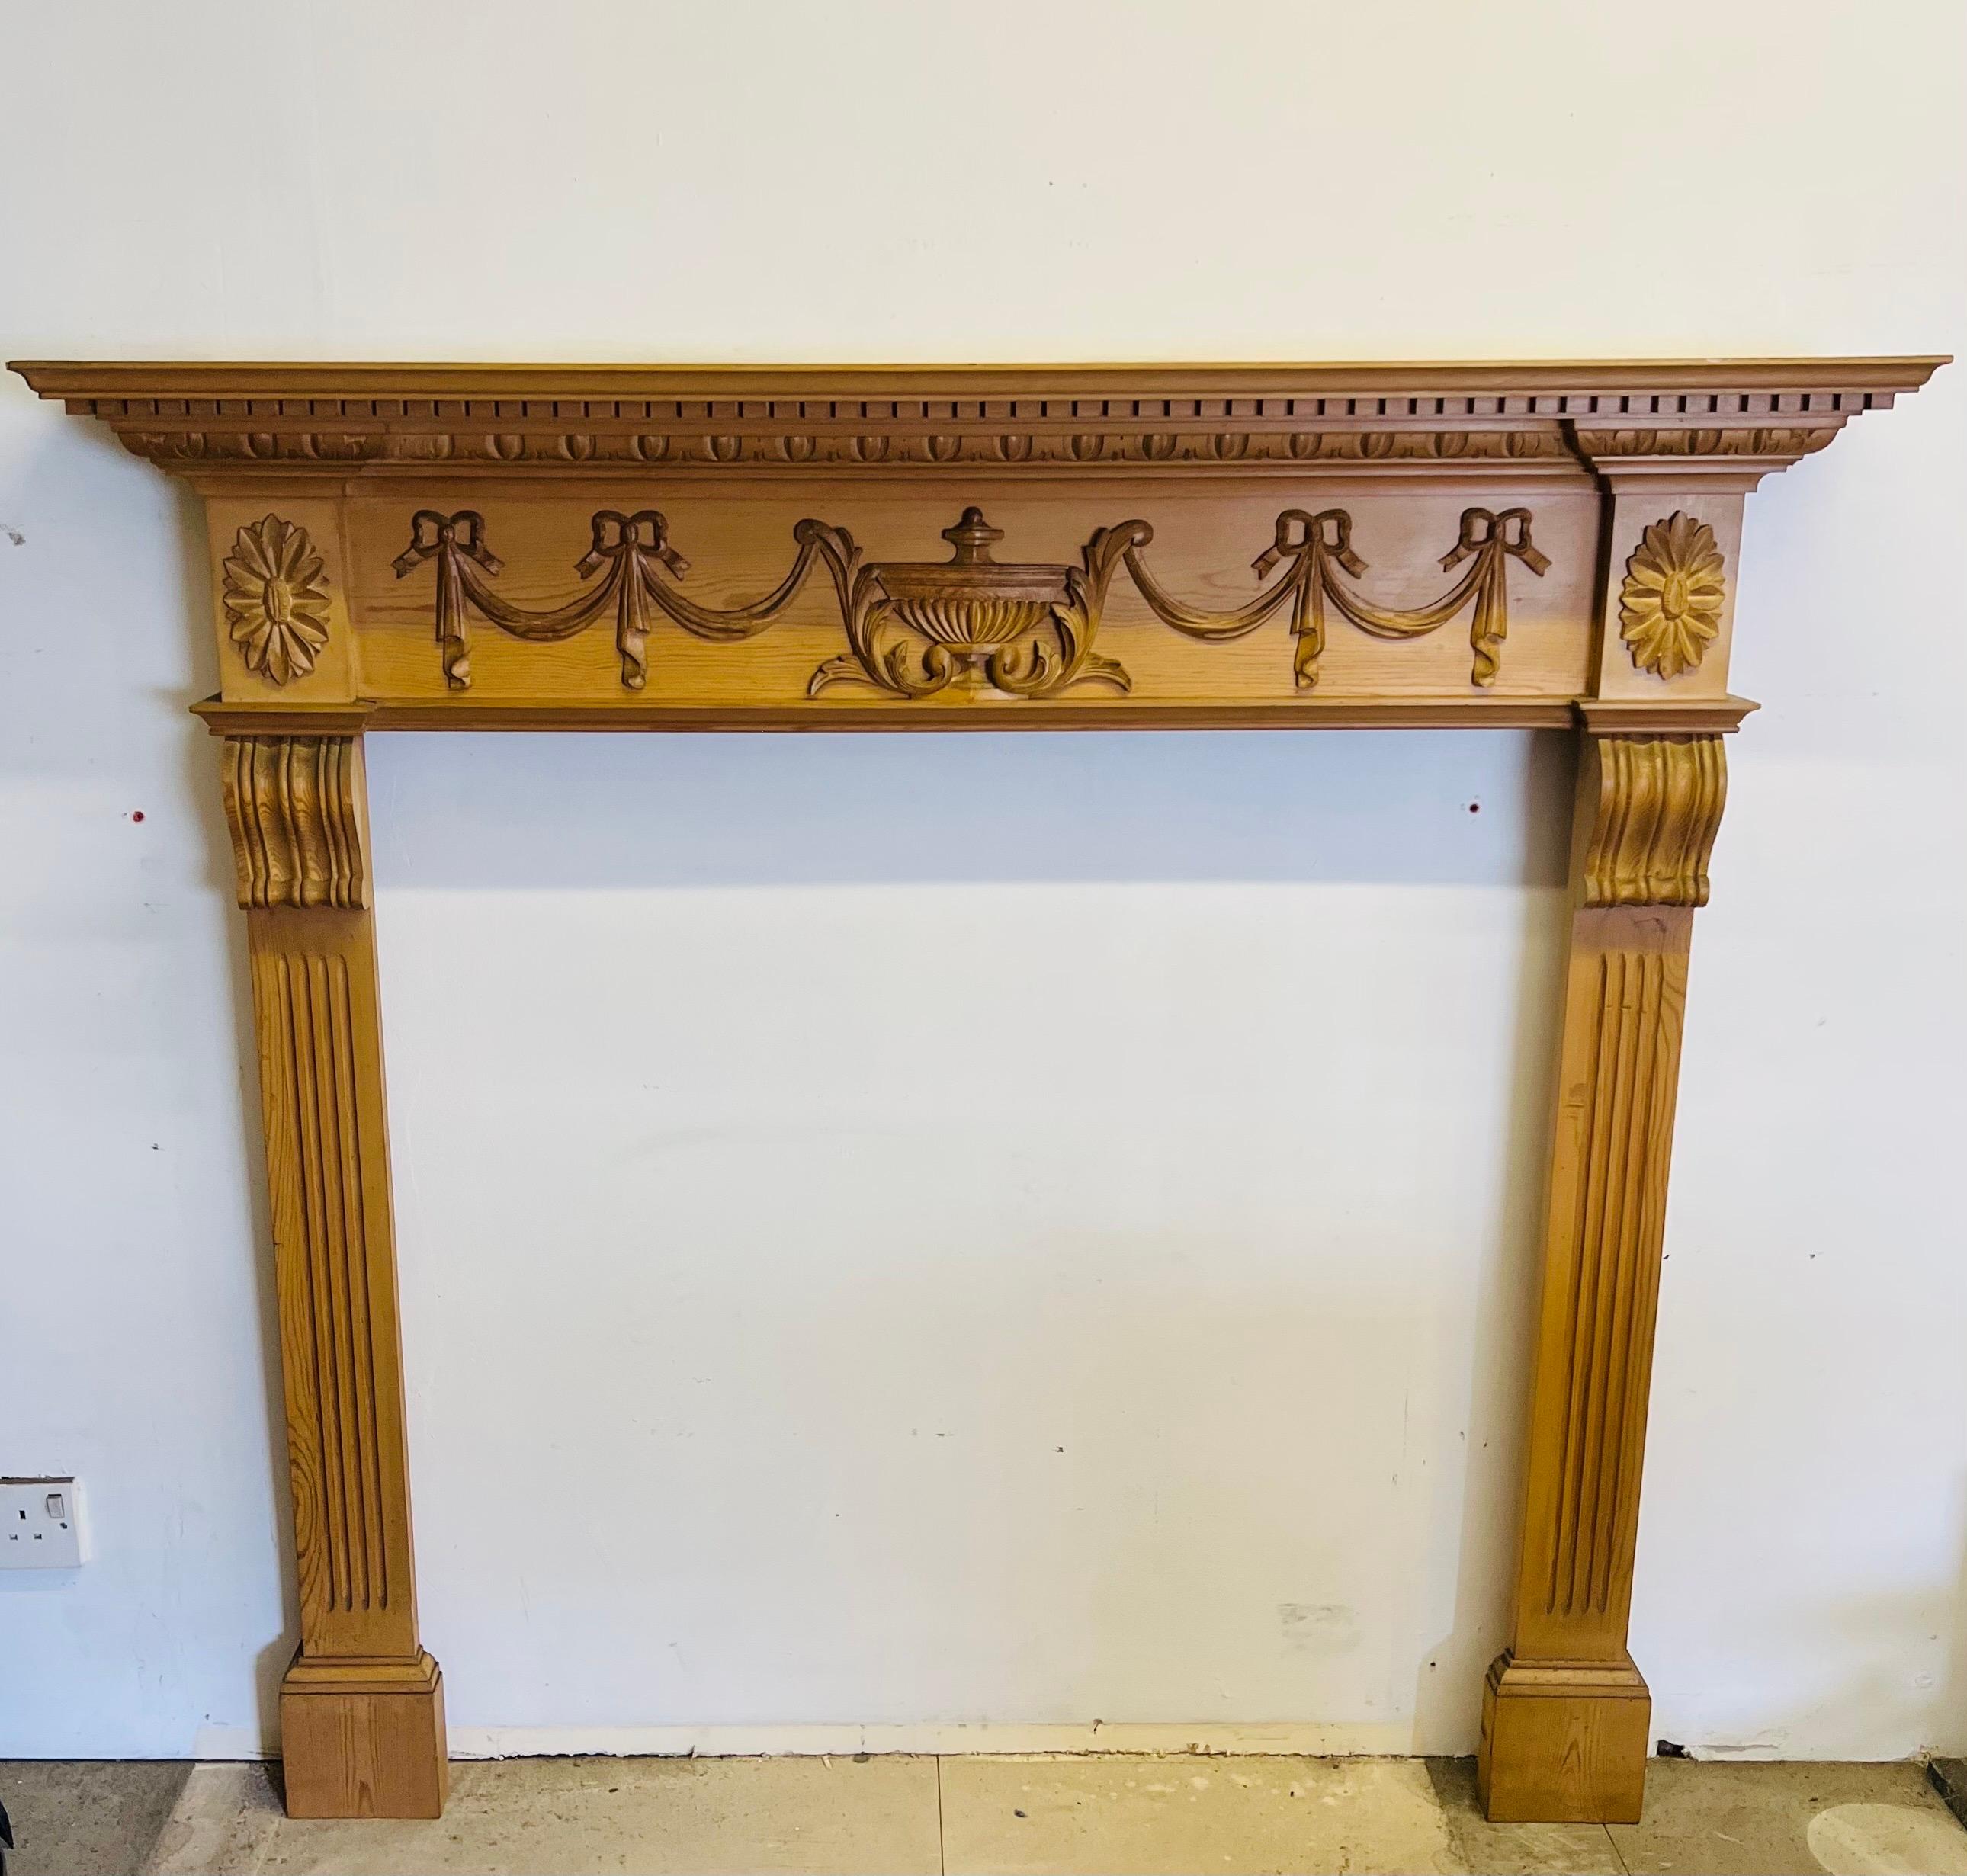 Our Georgian style, hand-carved mantelpieces and pine fire surround
A delightful design with a carved floral centre and fluted frieze.


Dimensions:

Shelf Width 55. 1/8 inch
Shelf Depth 7. 3/4 inch
Overall Height 50. 1/4 inch 
Opening